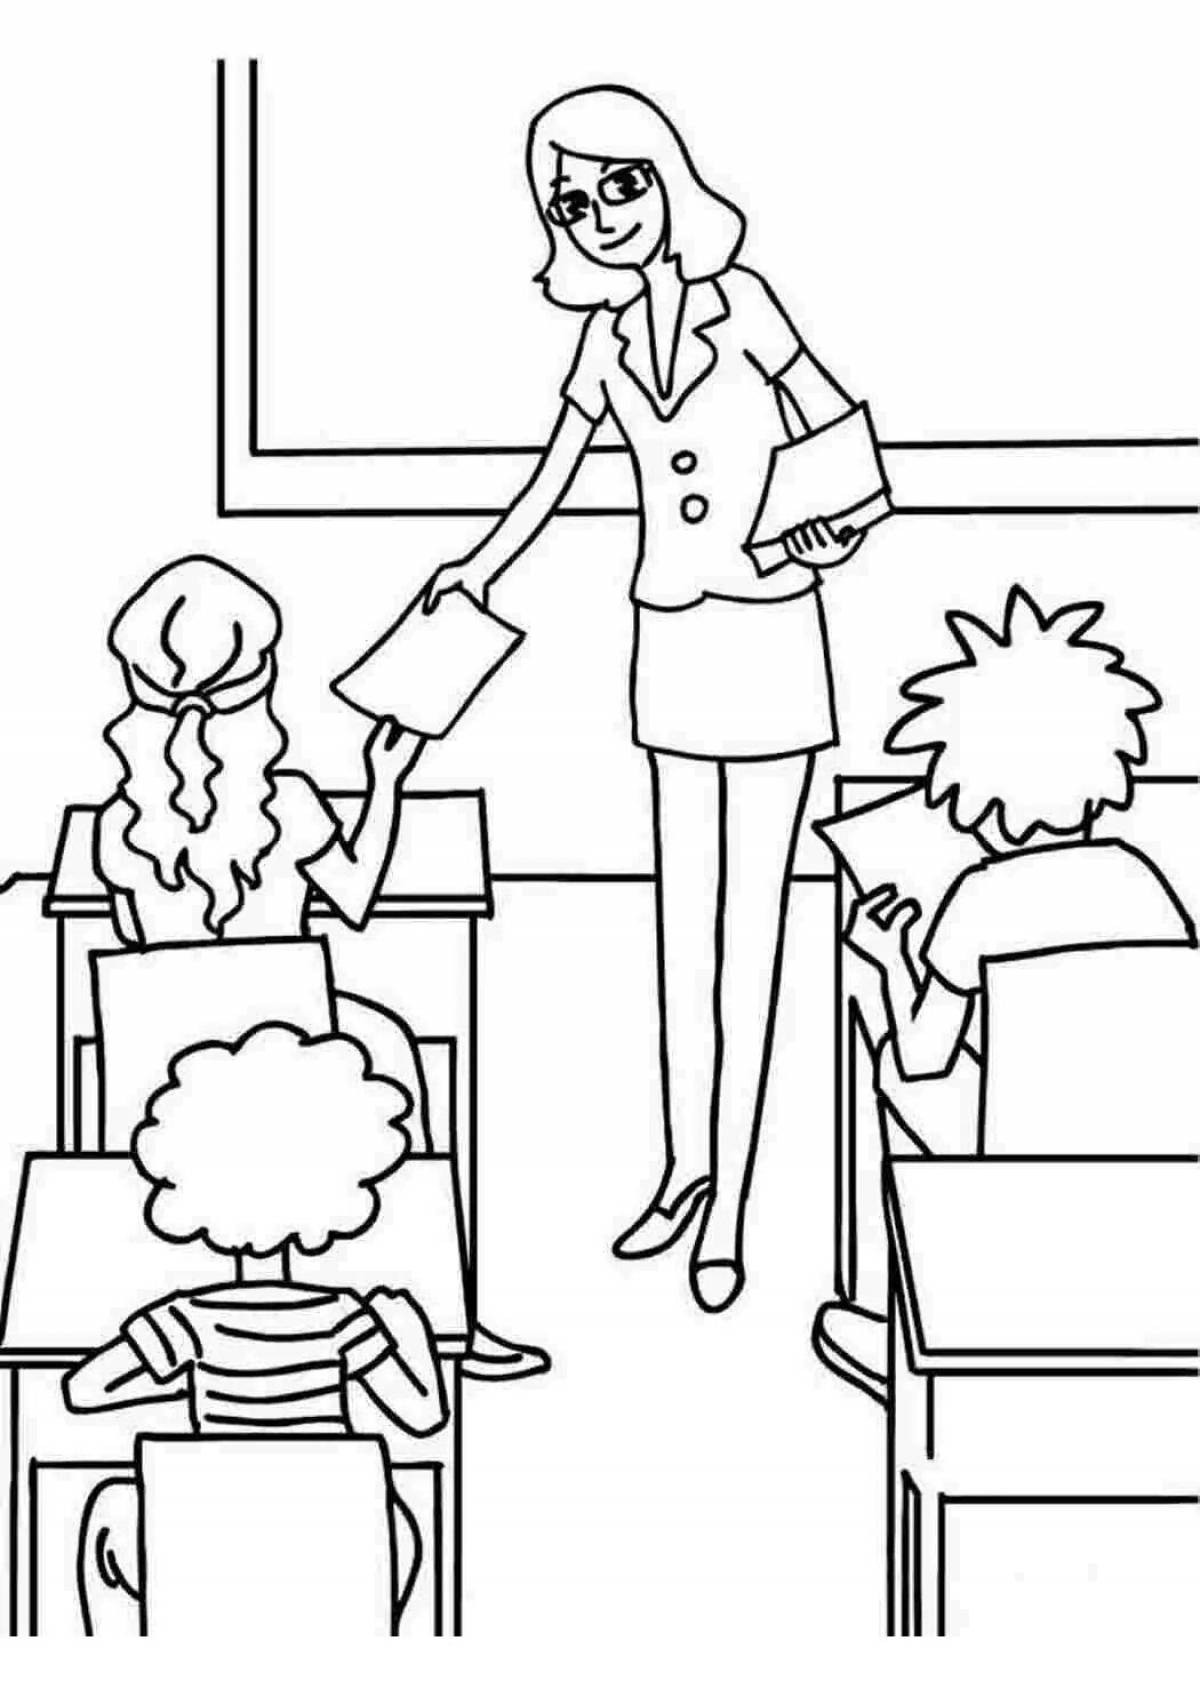 Exciting school life coloring page